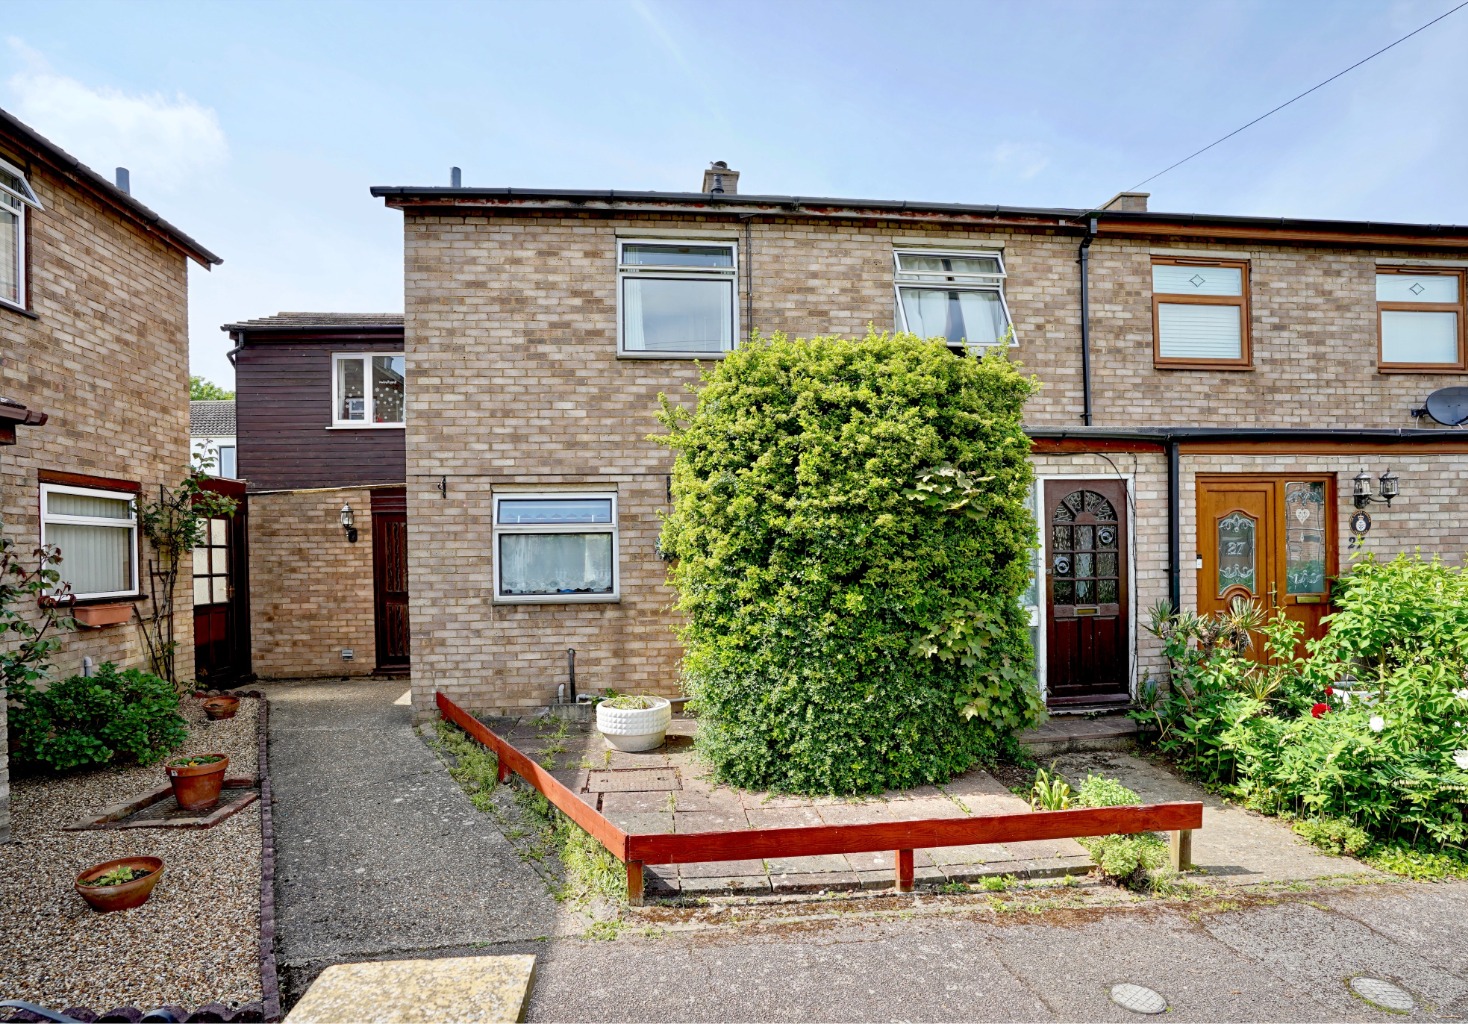 Spacious, four bedroom property in the heart of Eynesbury that would be ideal as a family home!